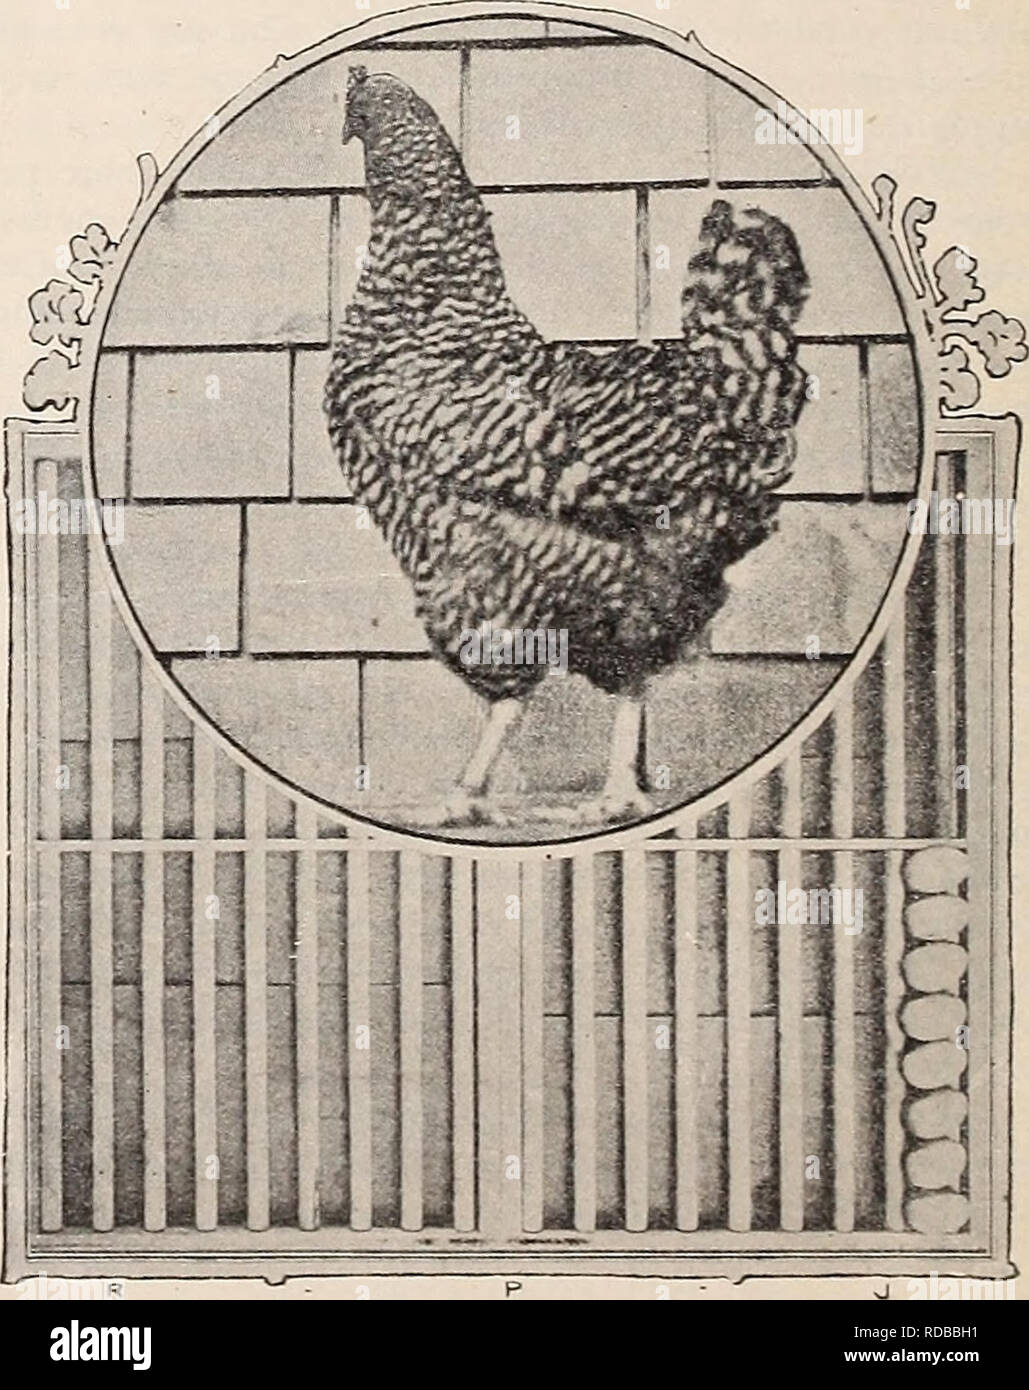 . Eggs and egg farms : Trustworthy information regarding the successful production of eggs--the construction plans of poultry buildings and the methods of feeding that make egg farming most profitable ... Poultry; Eggs Production. 1âA GOOD DOZEN FirstâThe consumer entertains doubt as to the qualitj' of the goods, but â will buy an increased amount if convinced that the article is just what is wanted. Did you ever see a man taking breakfast in a hotel, supremely satisfied that the egg in front of him was perfectly- fresh? There is always a doubt of it. Yet good prices are paid for this delicacy Stock Photo